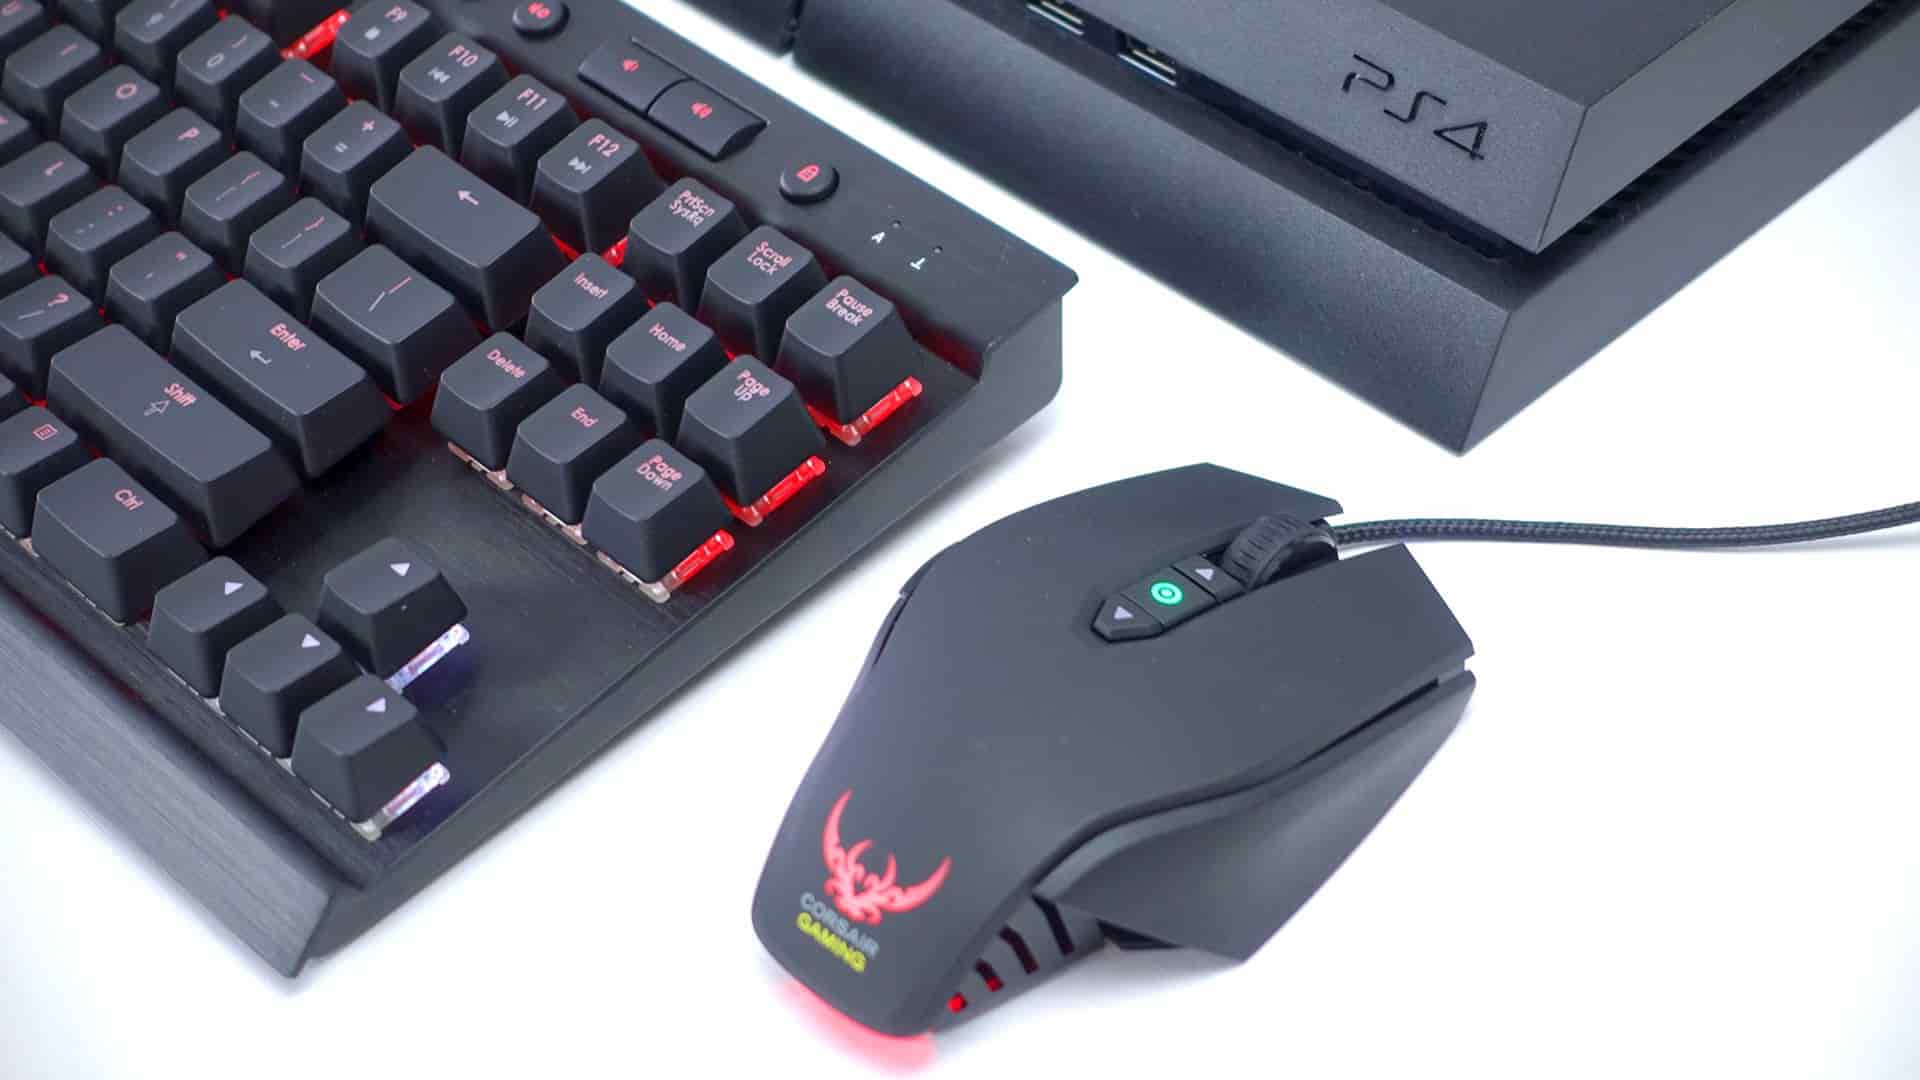 How To Use A Keyboard And Mouse On PS4, And Which Games Are Compatible